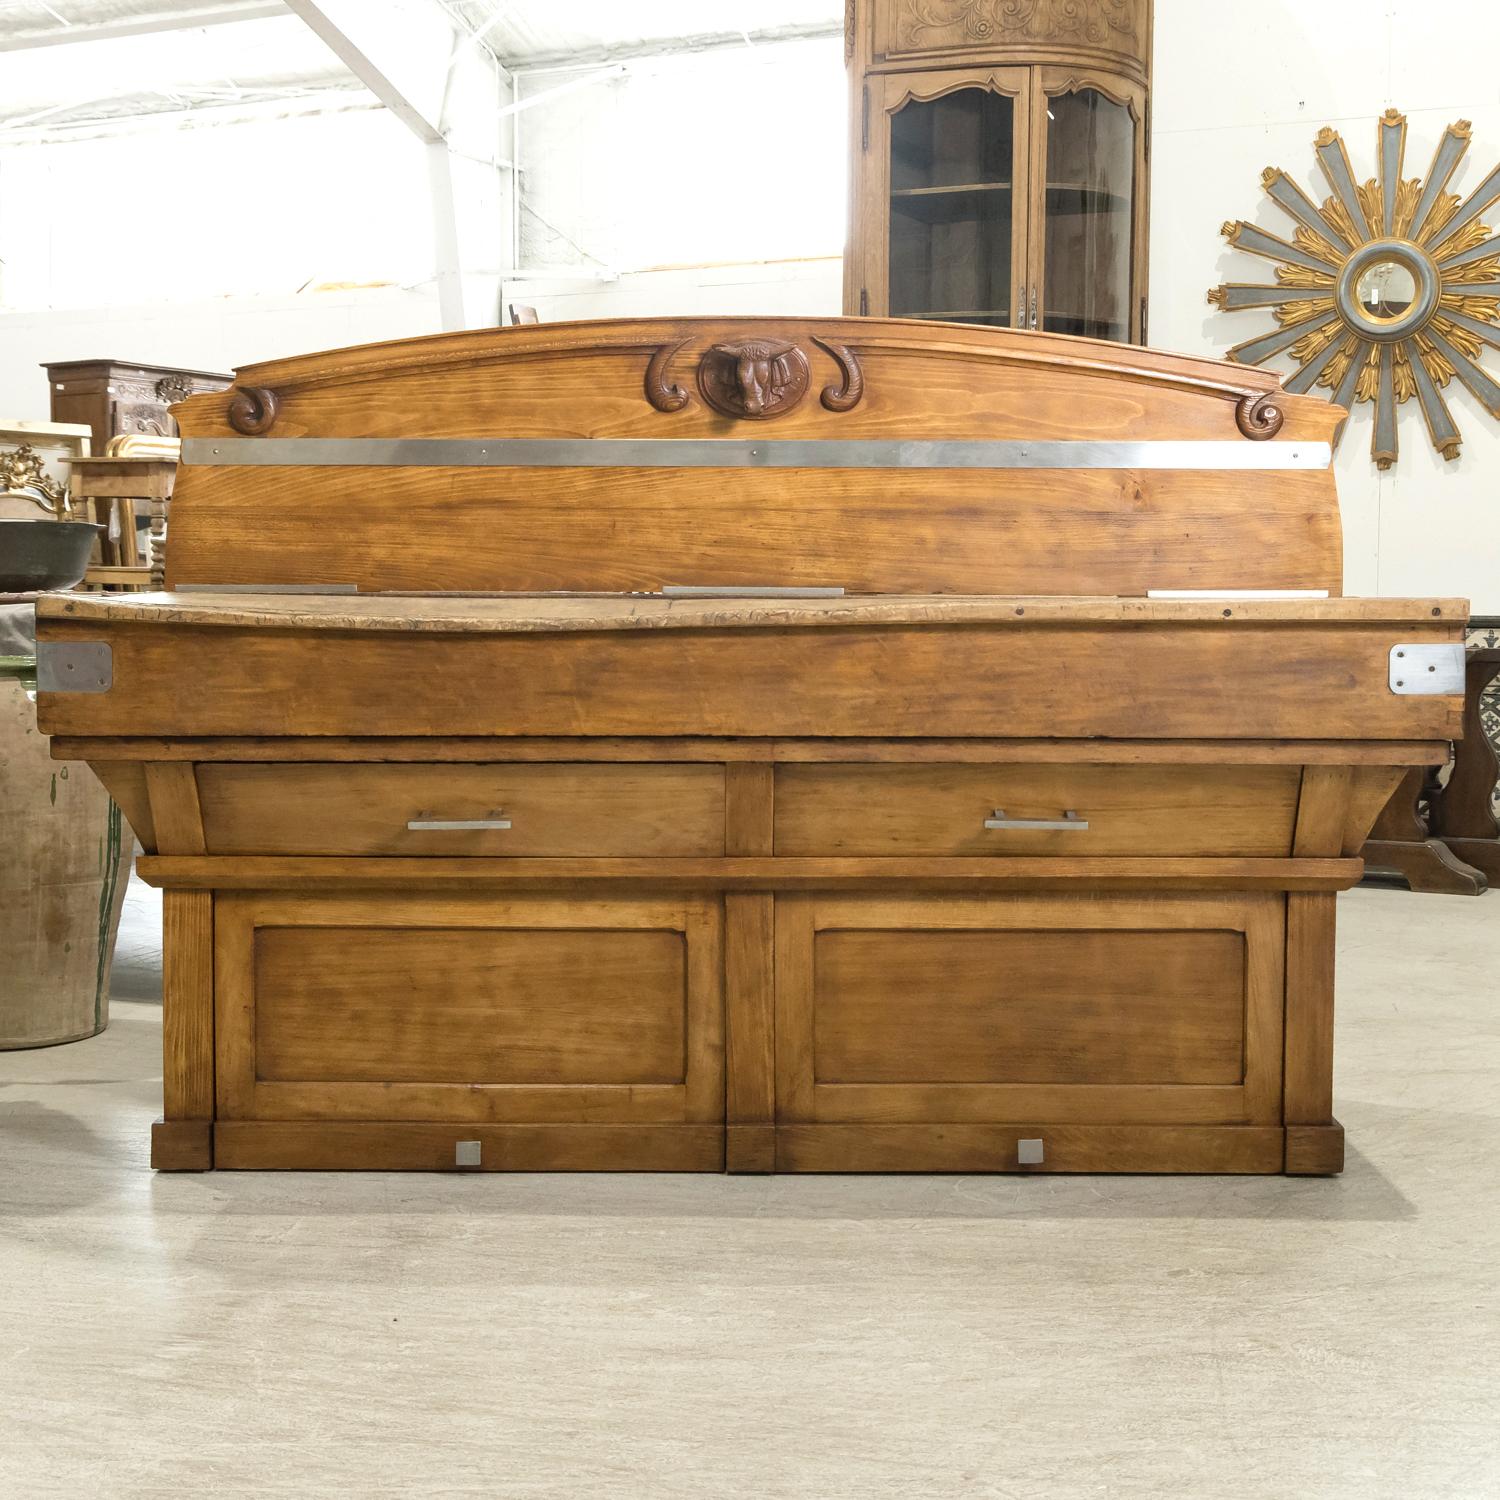 A superb early 20th century French double billot de boucher or butcher block, circa 1920s, handcrafted of mixed woods in Paris. Wonderfully constructed with thick, hand carved pieces of wood, the large chopping surface is in great original